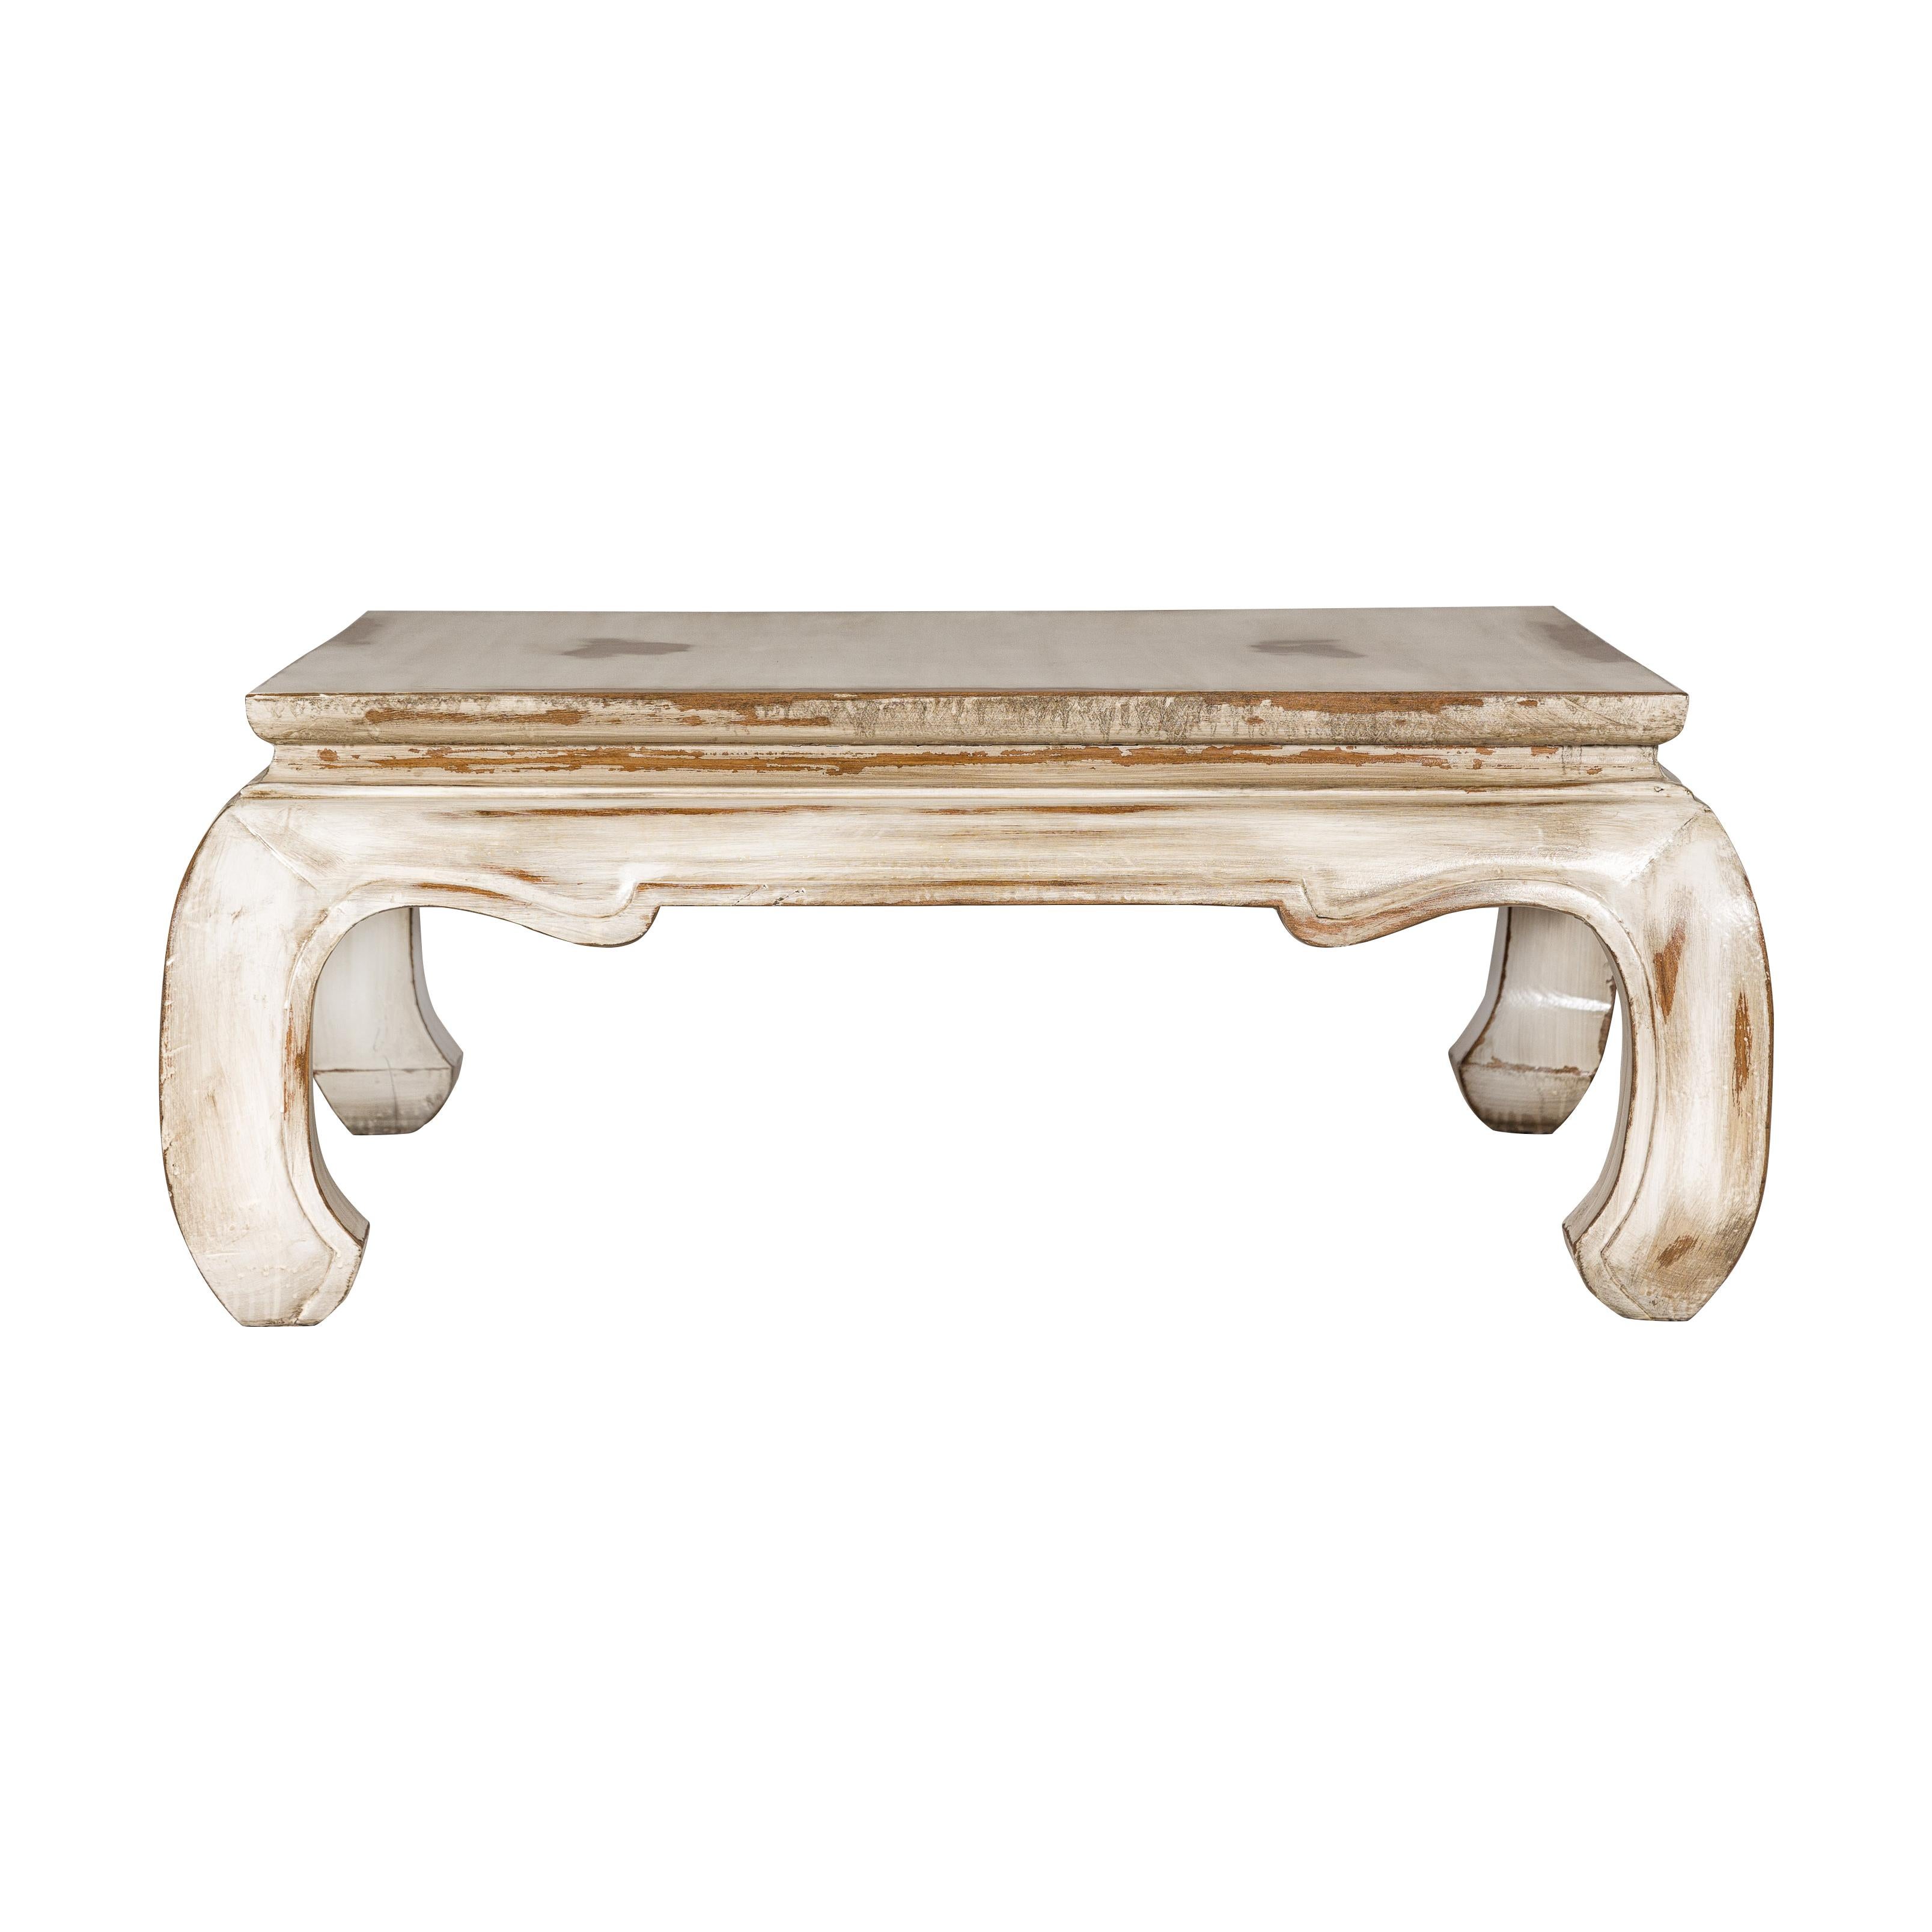 Distressed White Coffee Table with Chow Legs and Square Top, Vintage 6